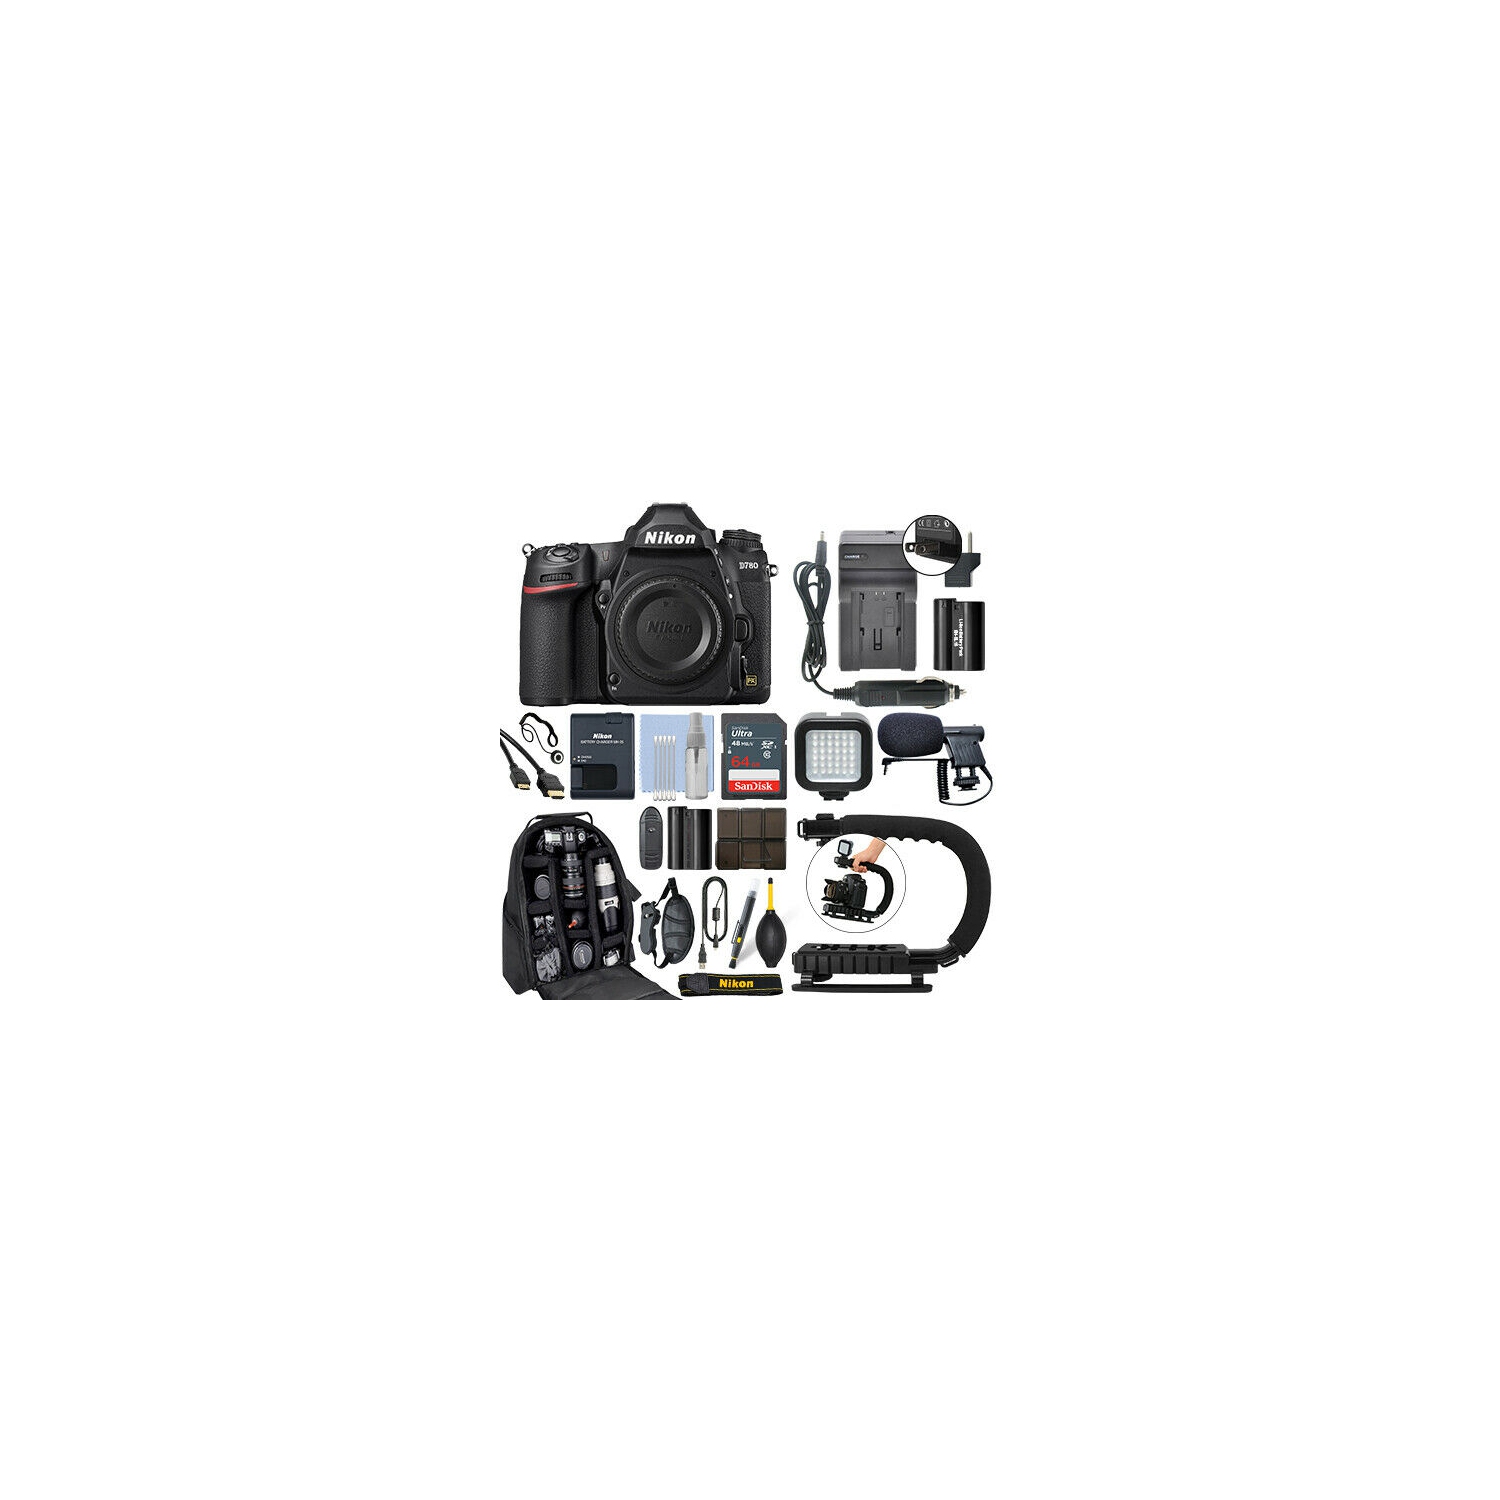 Nikon D780 DSLR Camera (Body Only) with Sandisk 64GB Memory Card Essential Package - US Version w/ Seller Warranty